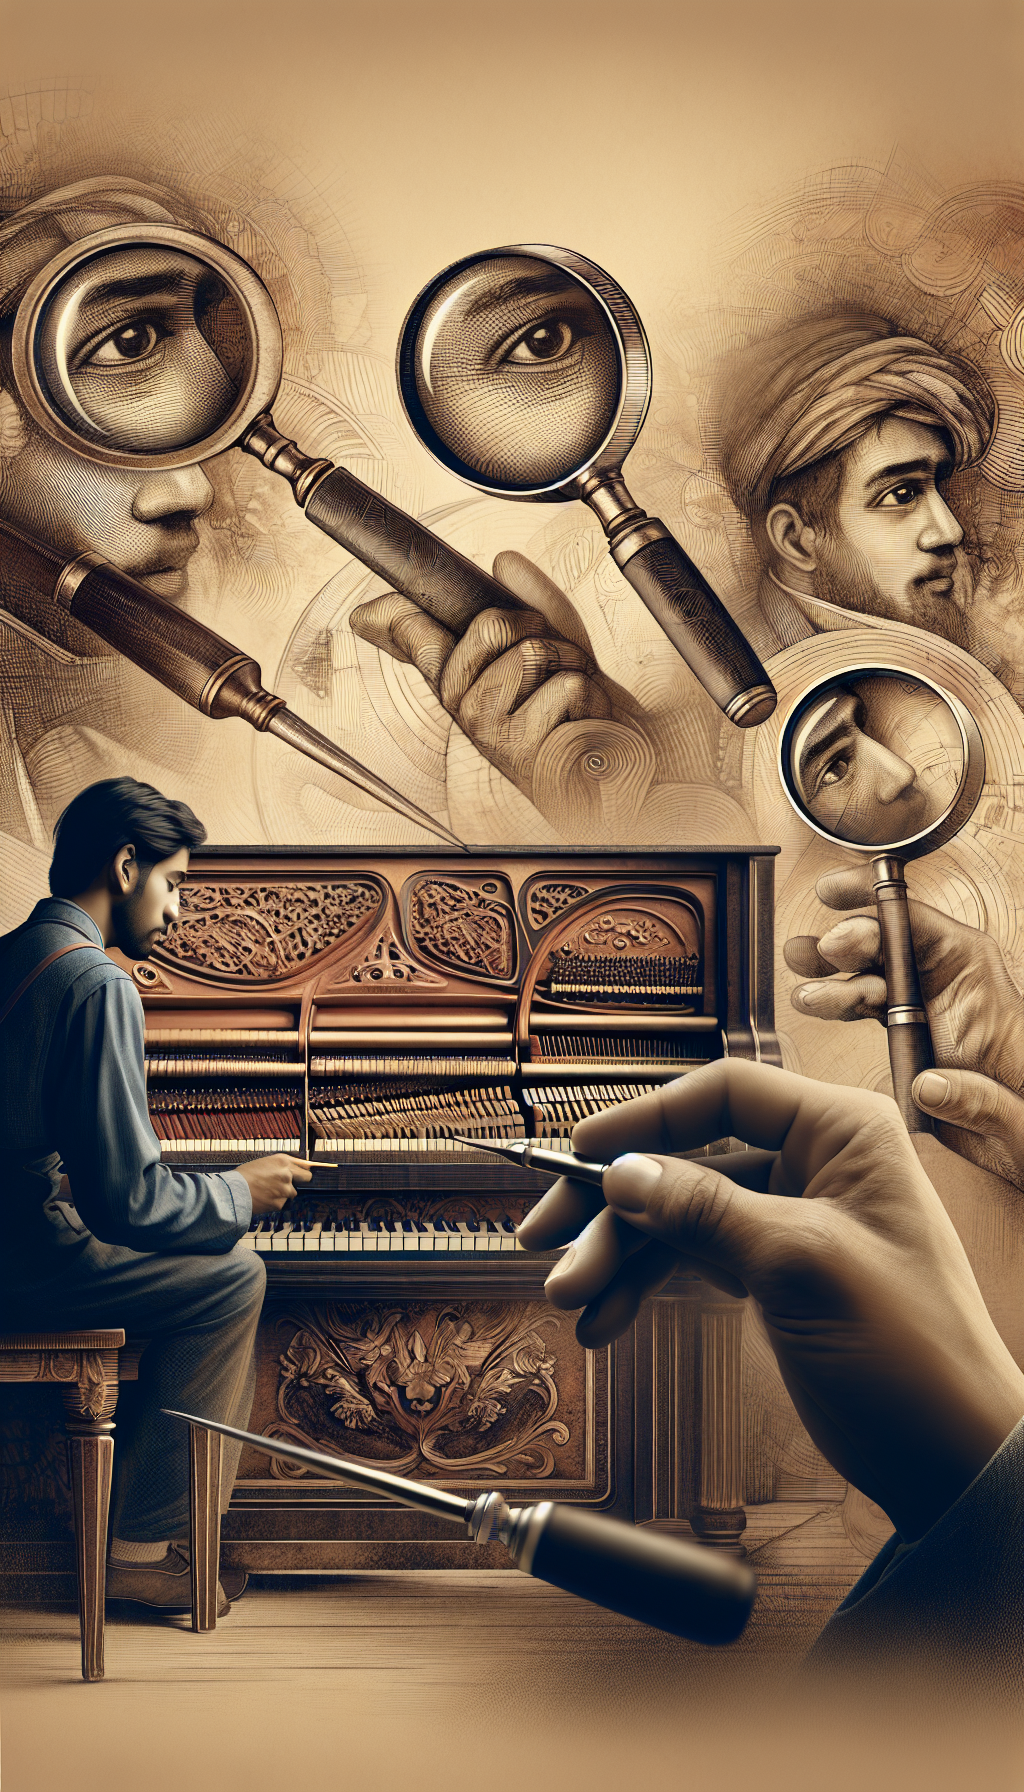 An illustration showcasing a craftsman delicately restoring an intricately designed antique piano, with magnifying glasses hovering above, each revealing a unique identifying feature of the piano (like maker’s marks and serial numbers). Style transitions from realistic detailing on the piano to whimsical, sepia-toned sketches on the edges, symbolizing the blend of authenticity and history.